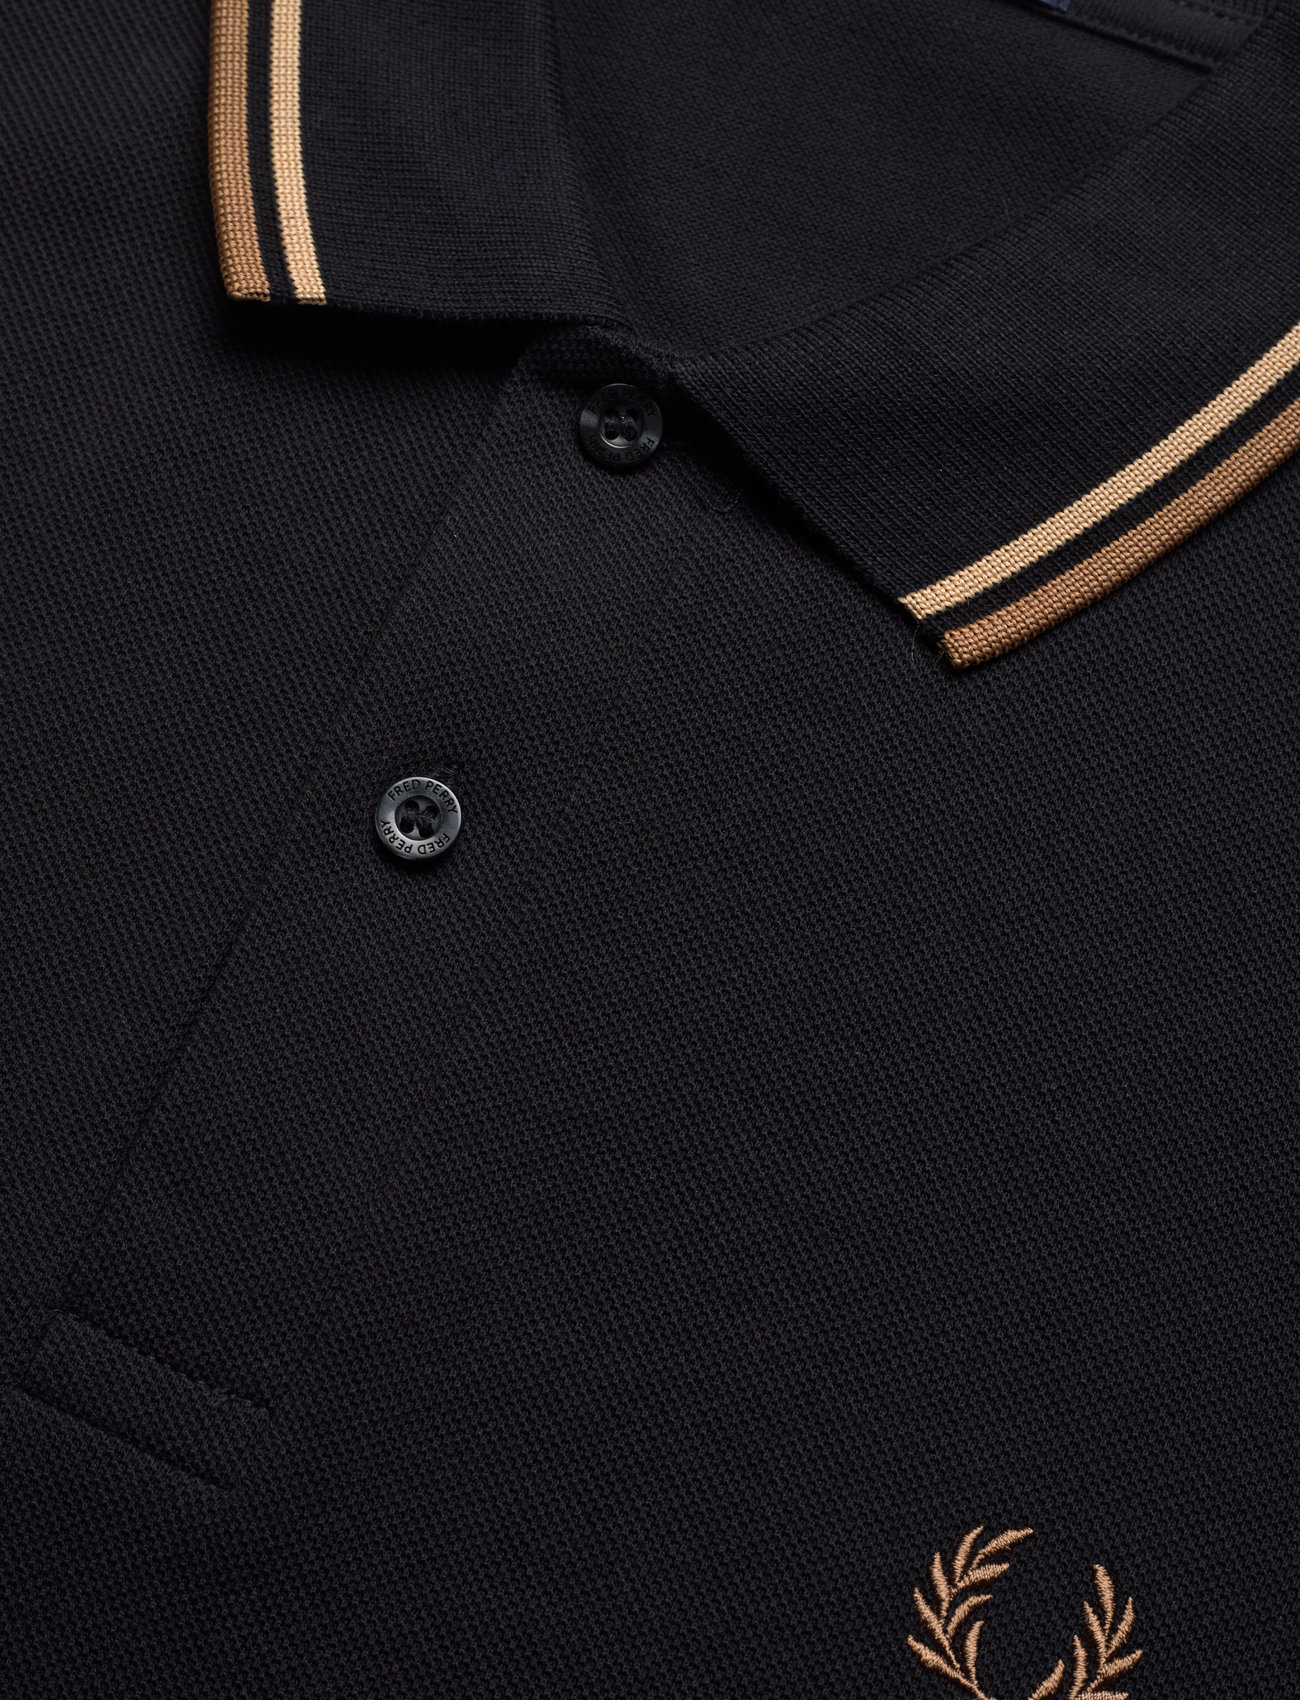 Fred Perry - TWIN TIPPED FP SHIRT - lyhythihaiset - bk/wrmston/shdst - 1